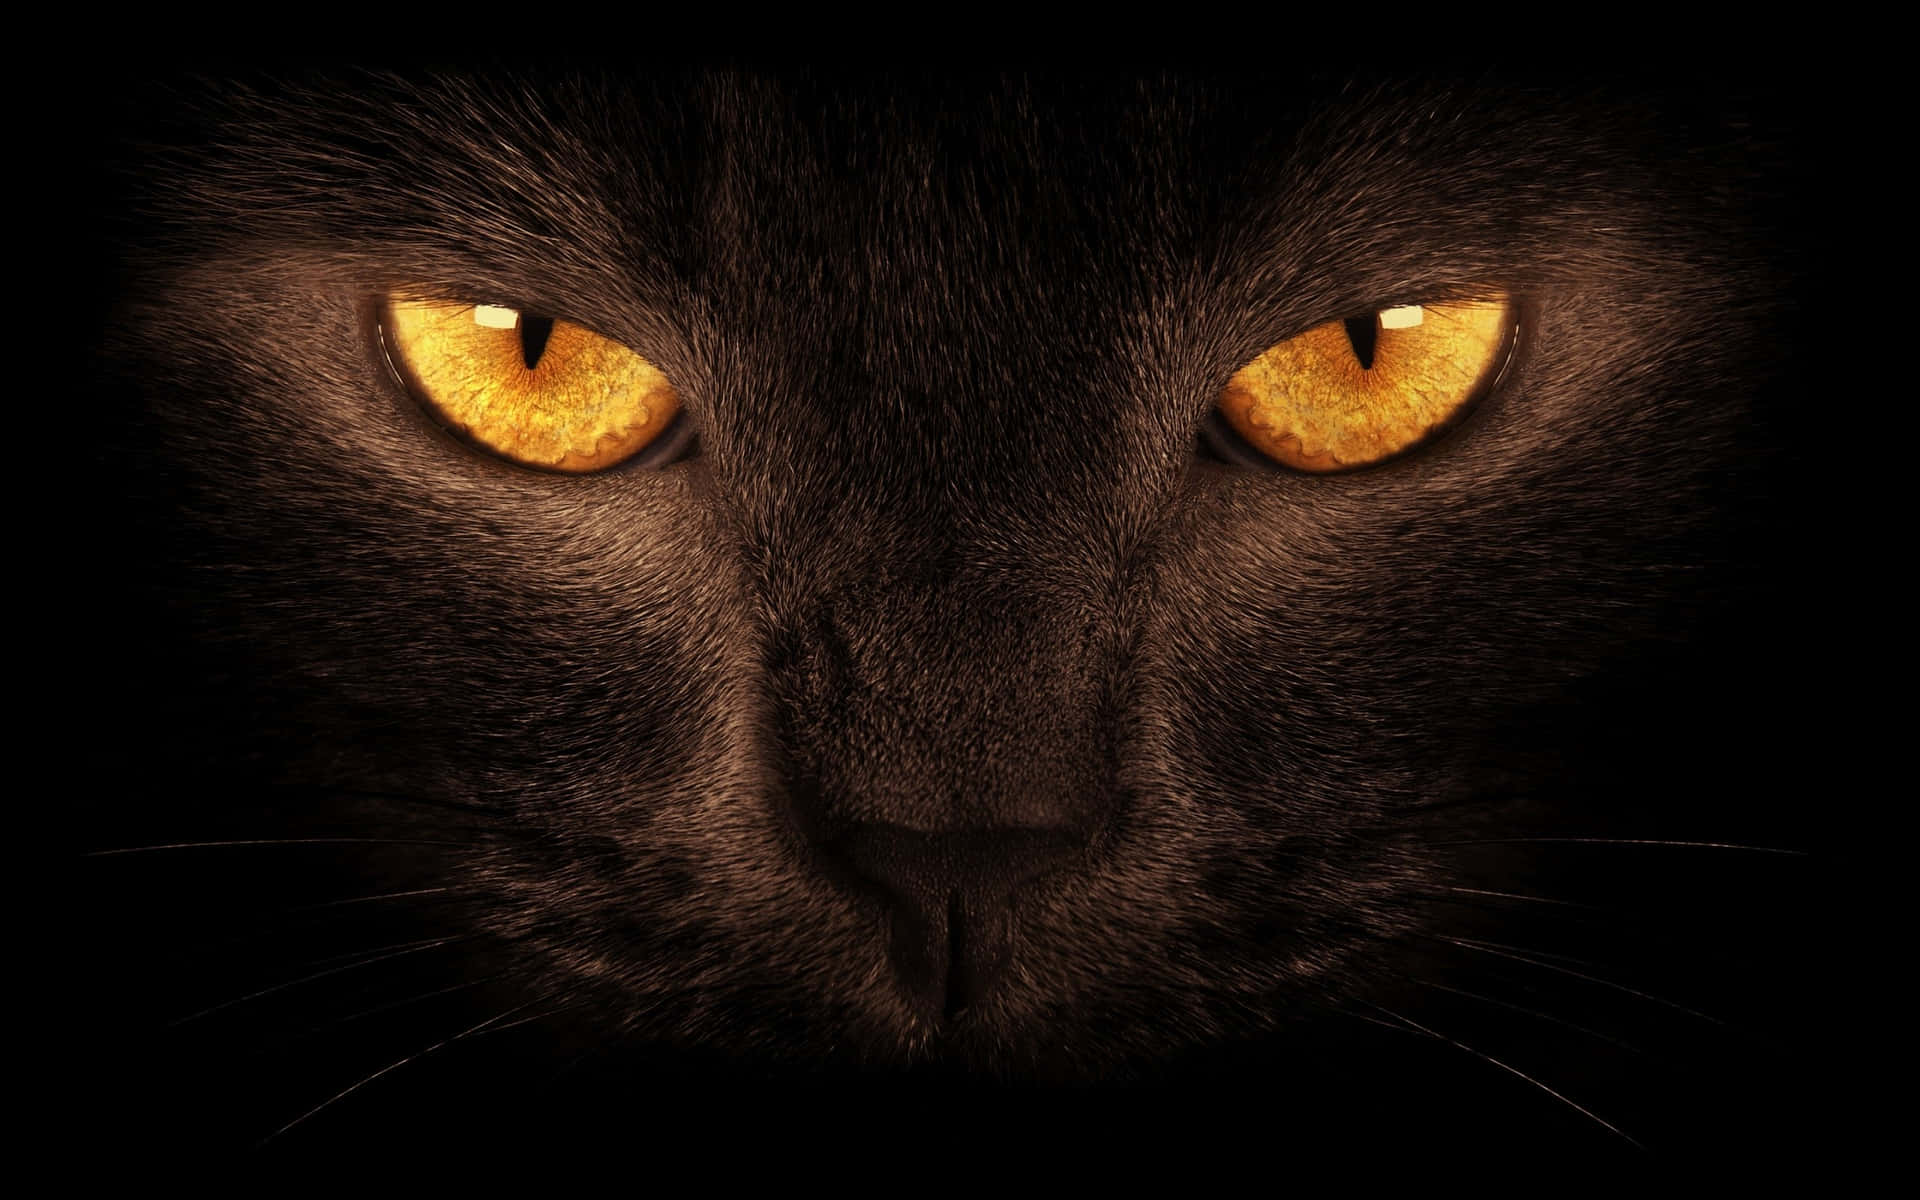 This sultry black cat peers out of the dark with a knowing look.